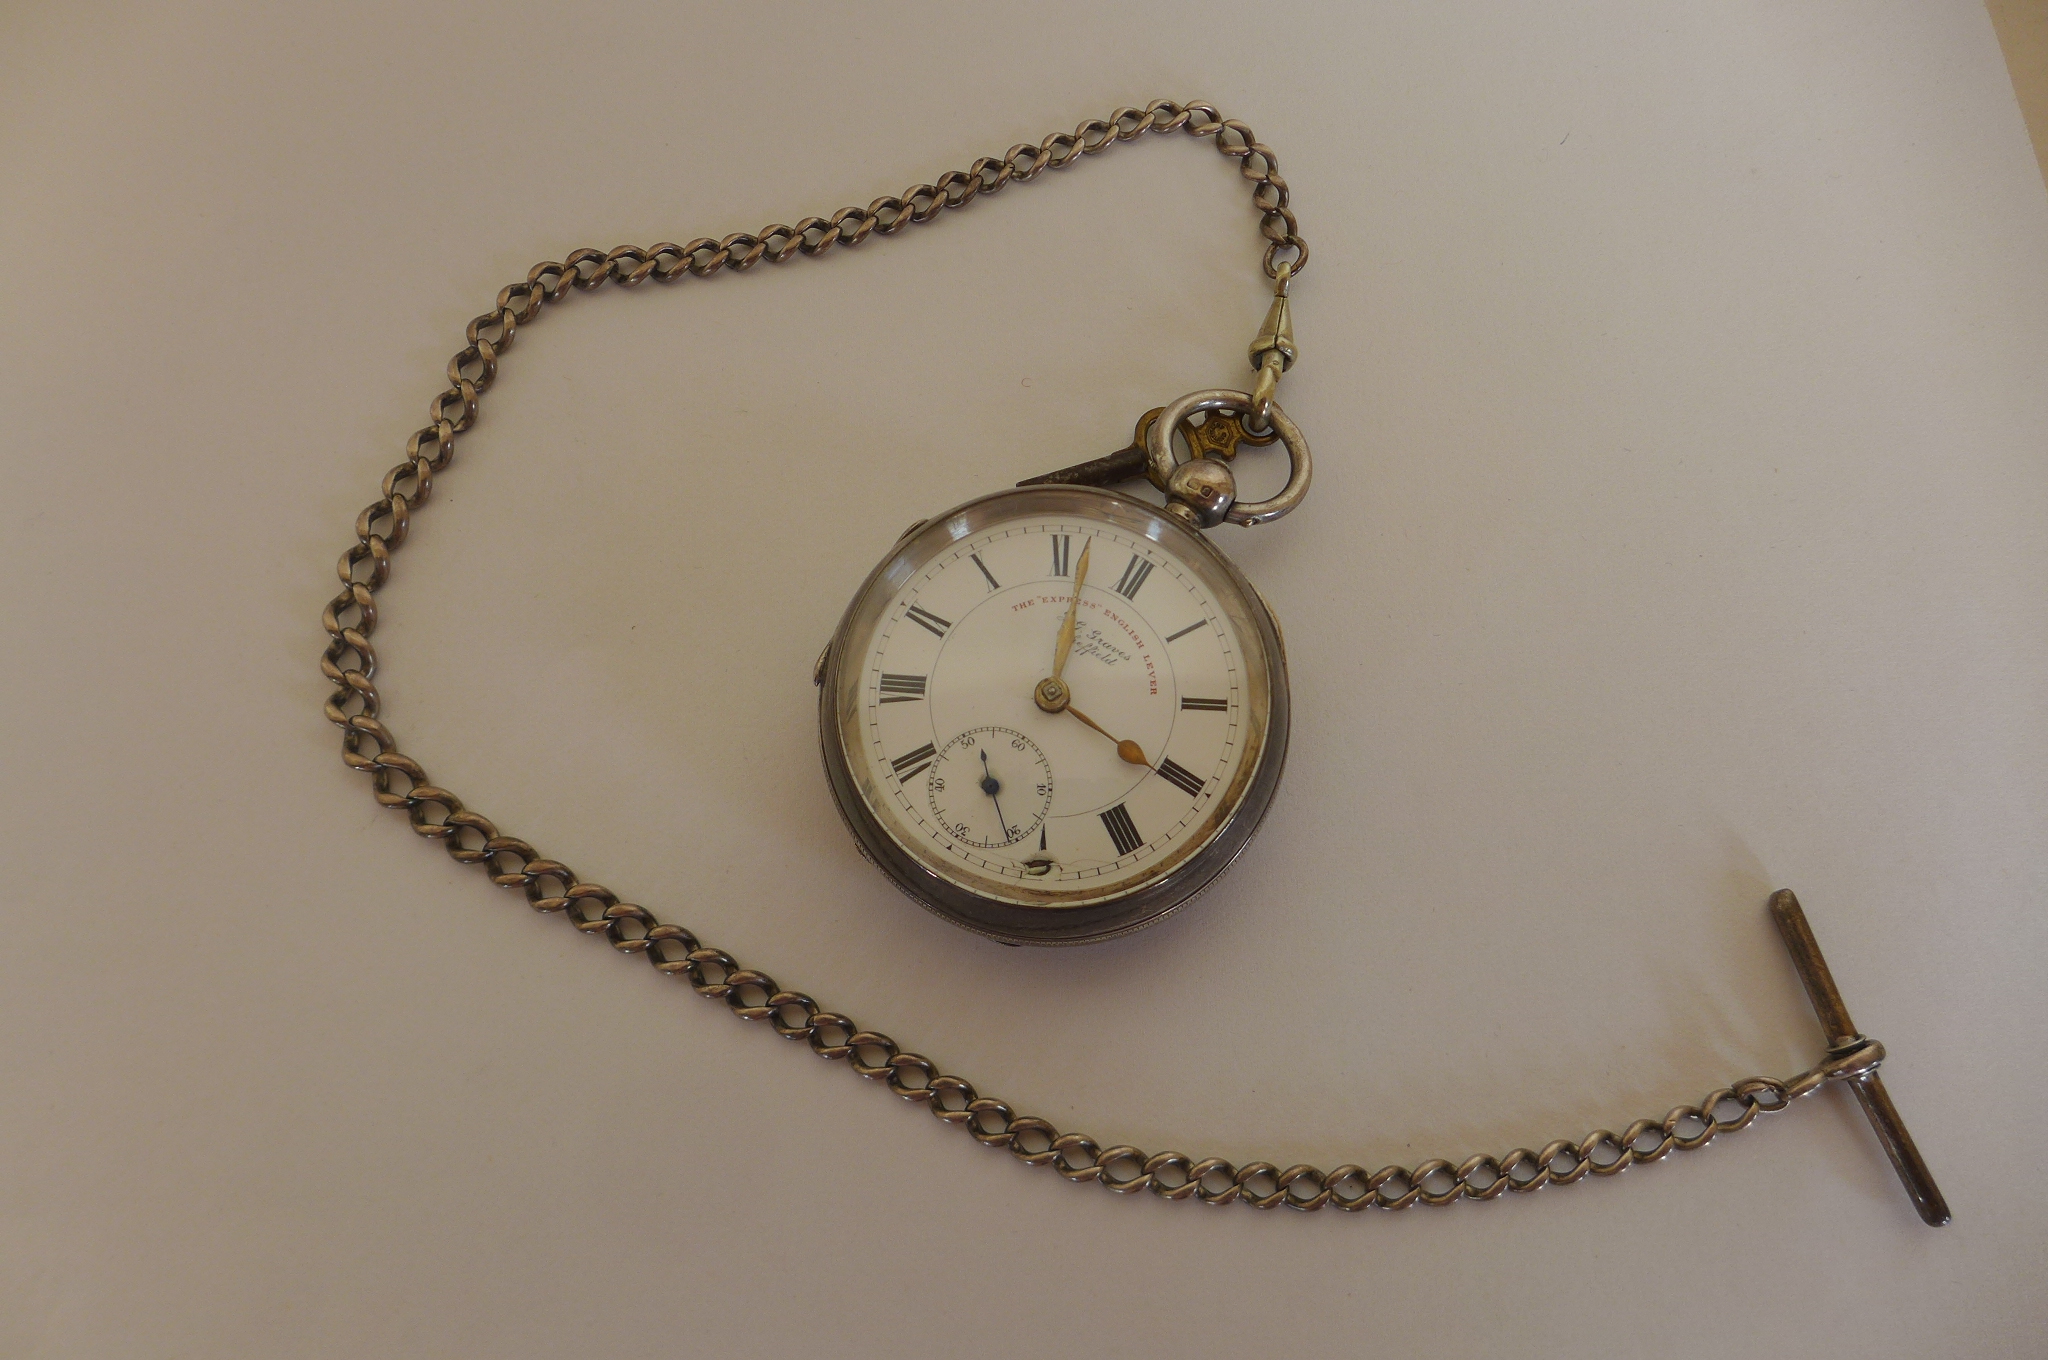 A silver Express English lever pocket watch and silver chain, watch running